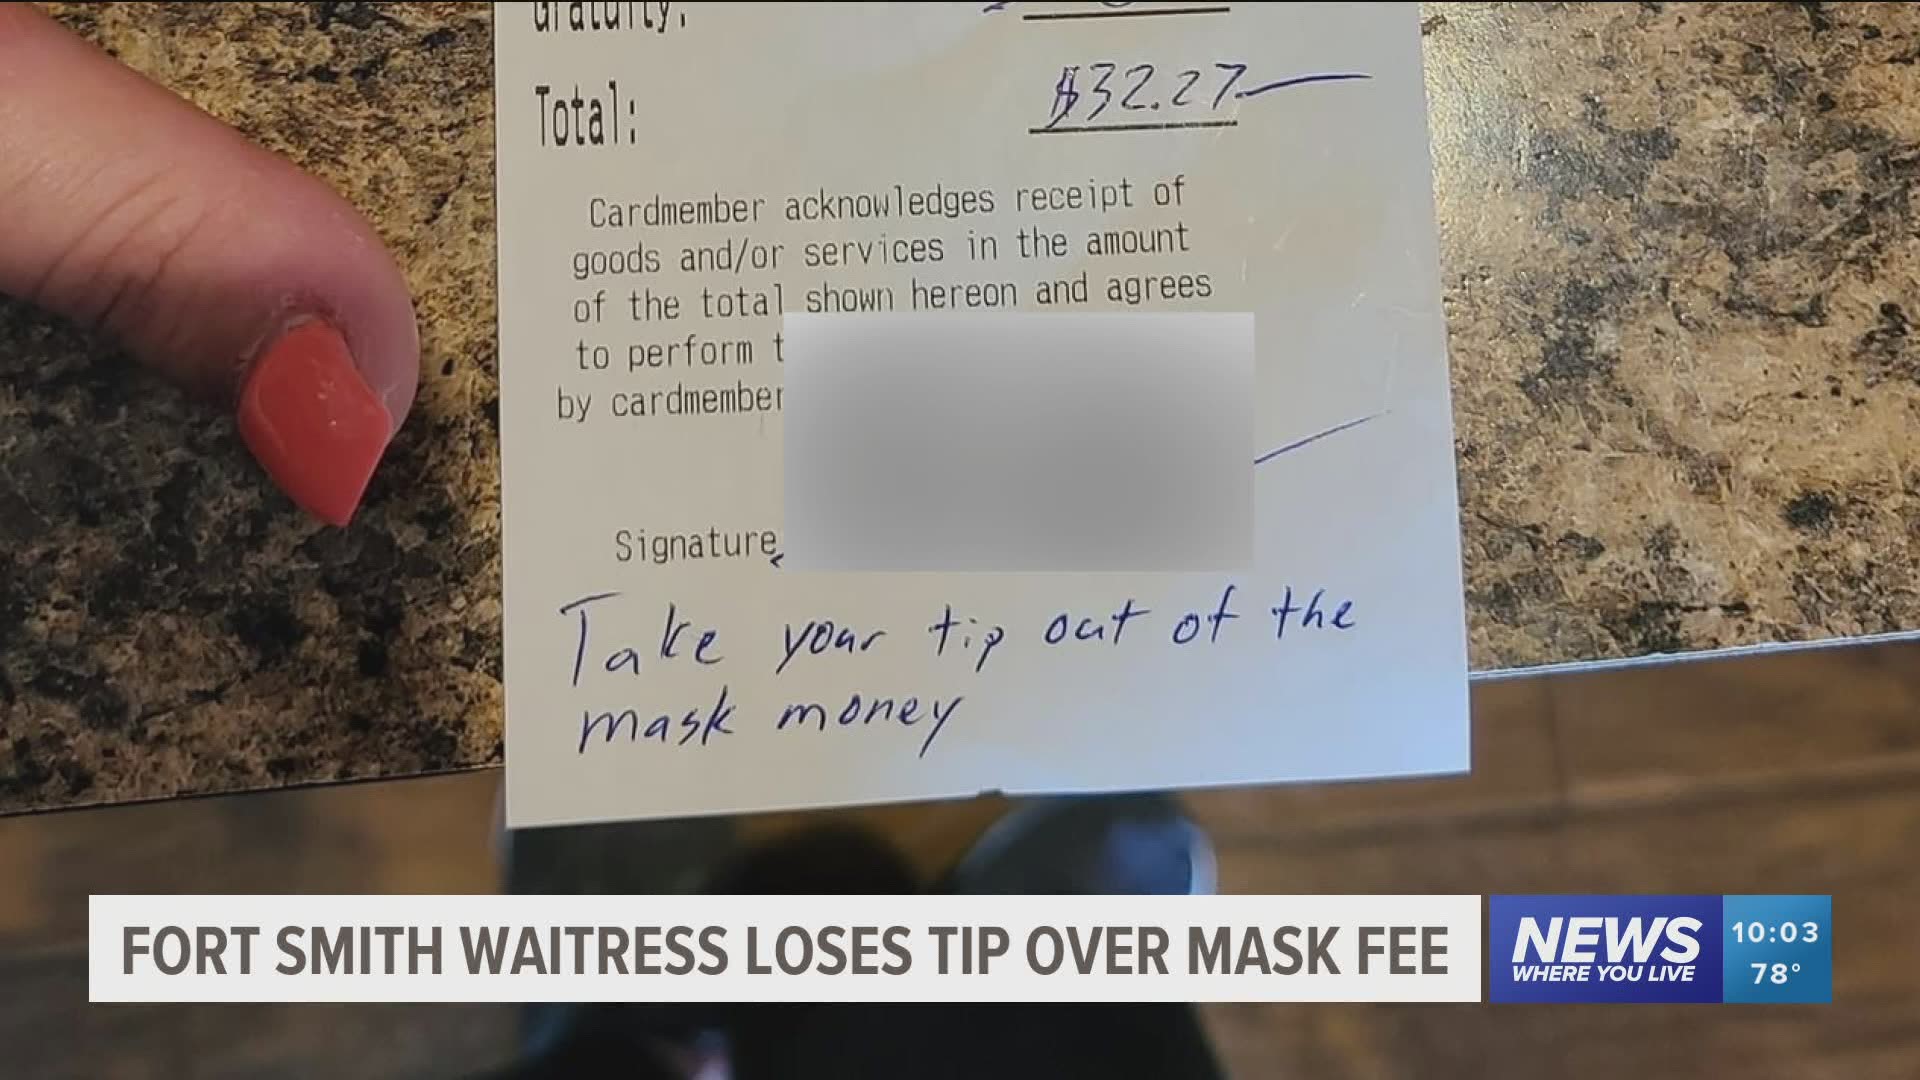 It was a $32 bill, but the couple left no tip. Instead, they left a message at the bottom reading "take your tip out of the mask money." https://bit.ly/2WFBTe4